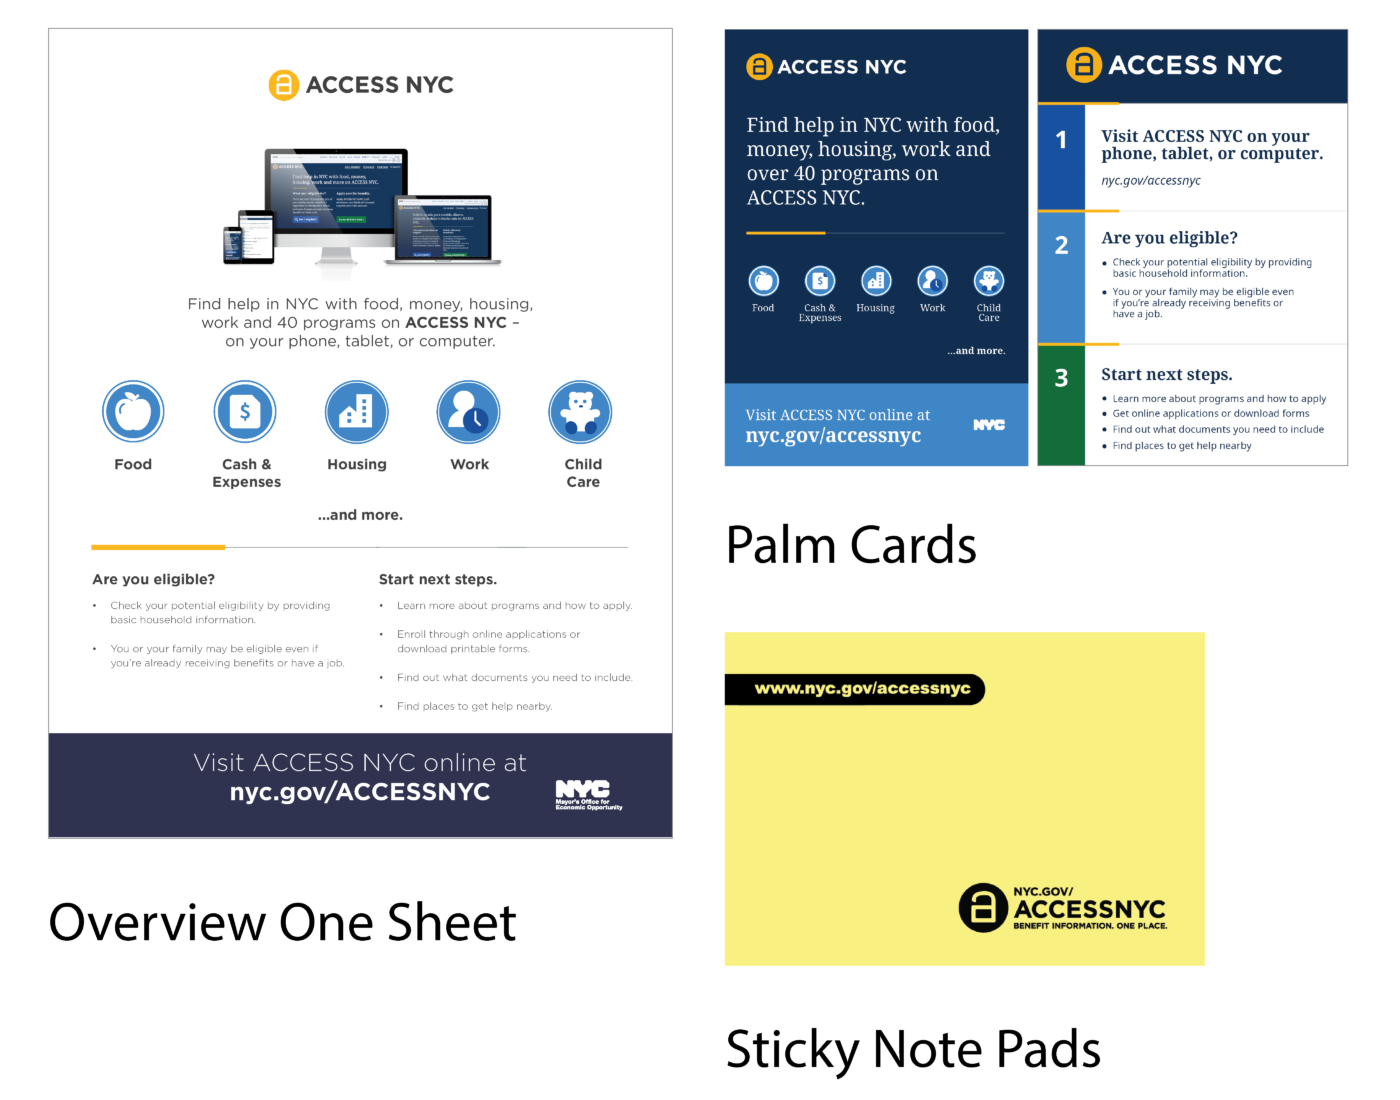 Three ACCESS NYC promotional materials in a grid including an overview one sheet, palm cards, and sticky note pads.